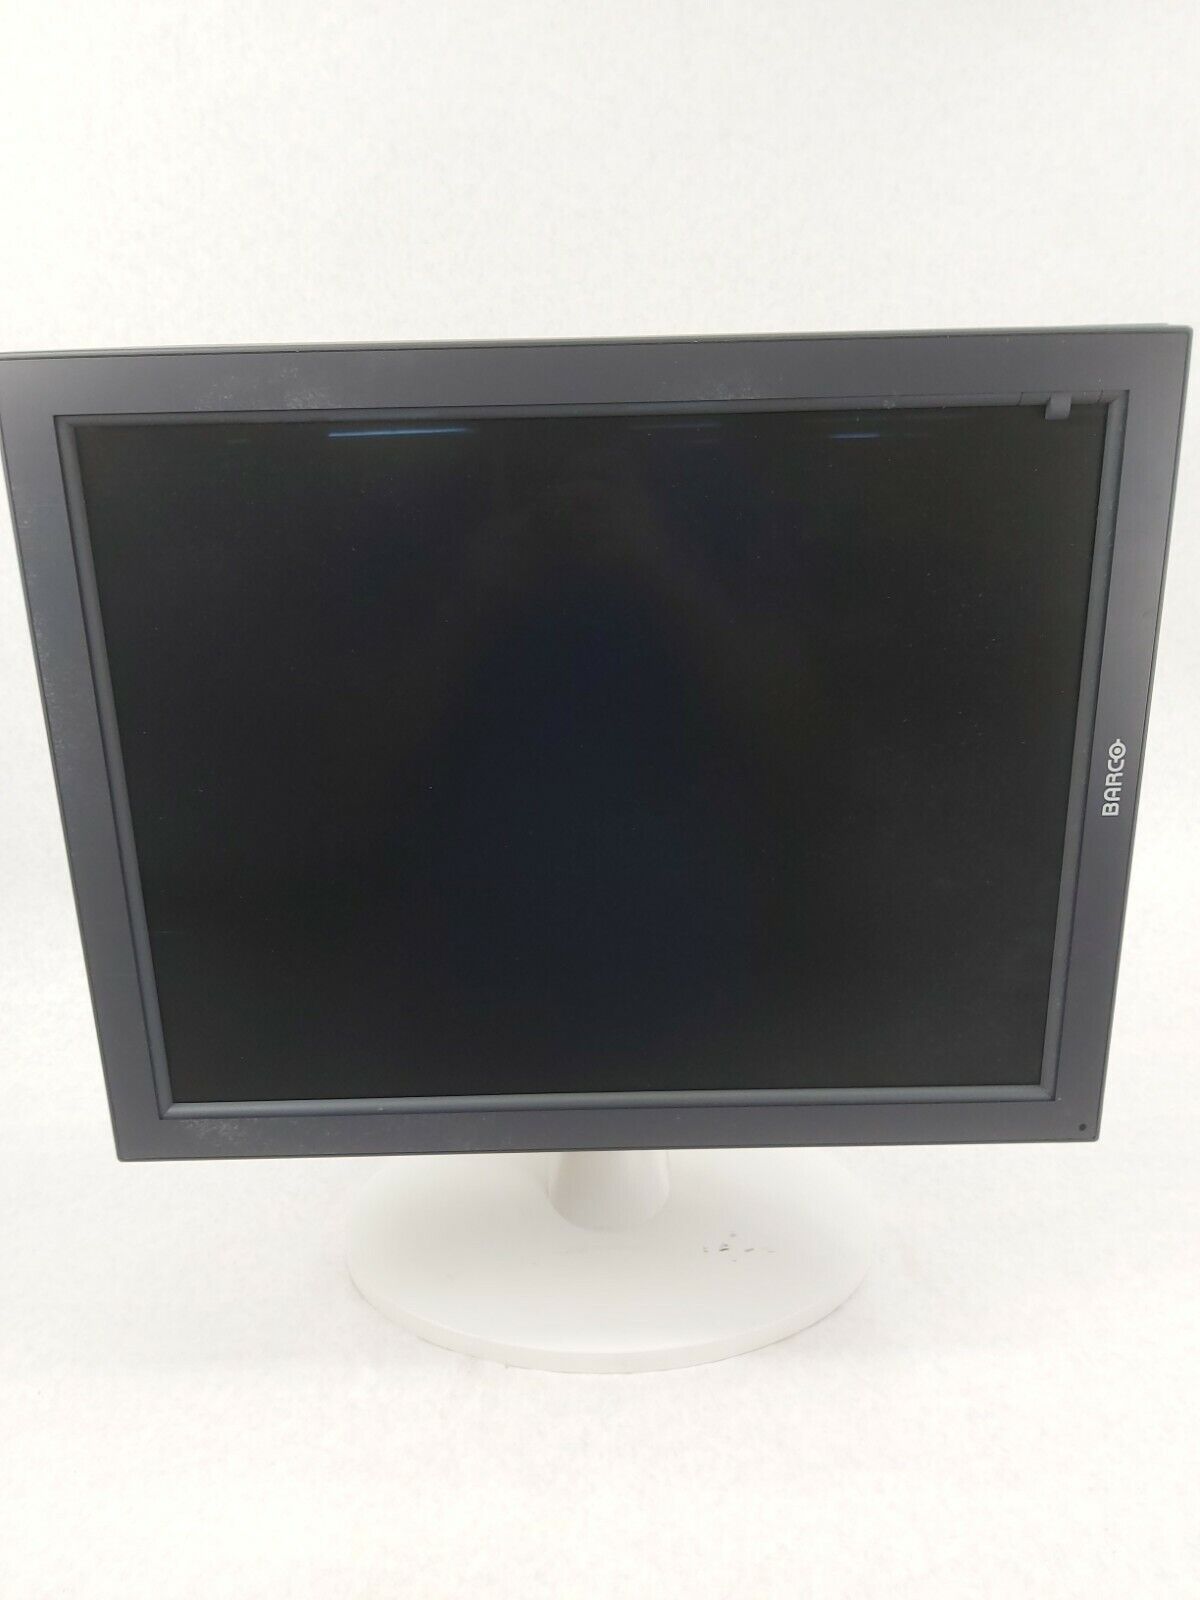 Barco MFGD3420 Medical Grayscale LCD Display Monitor